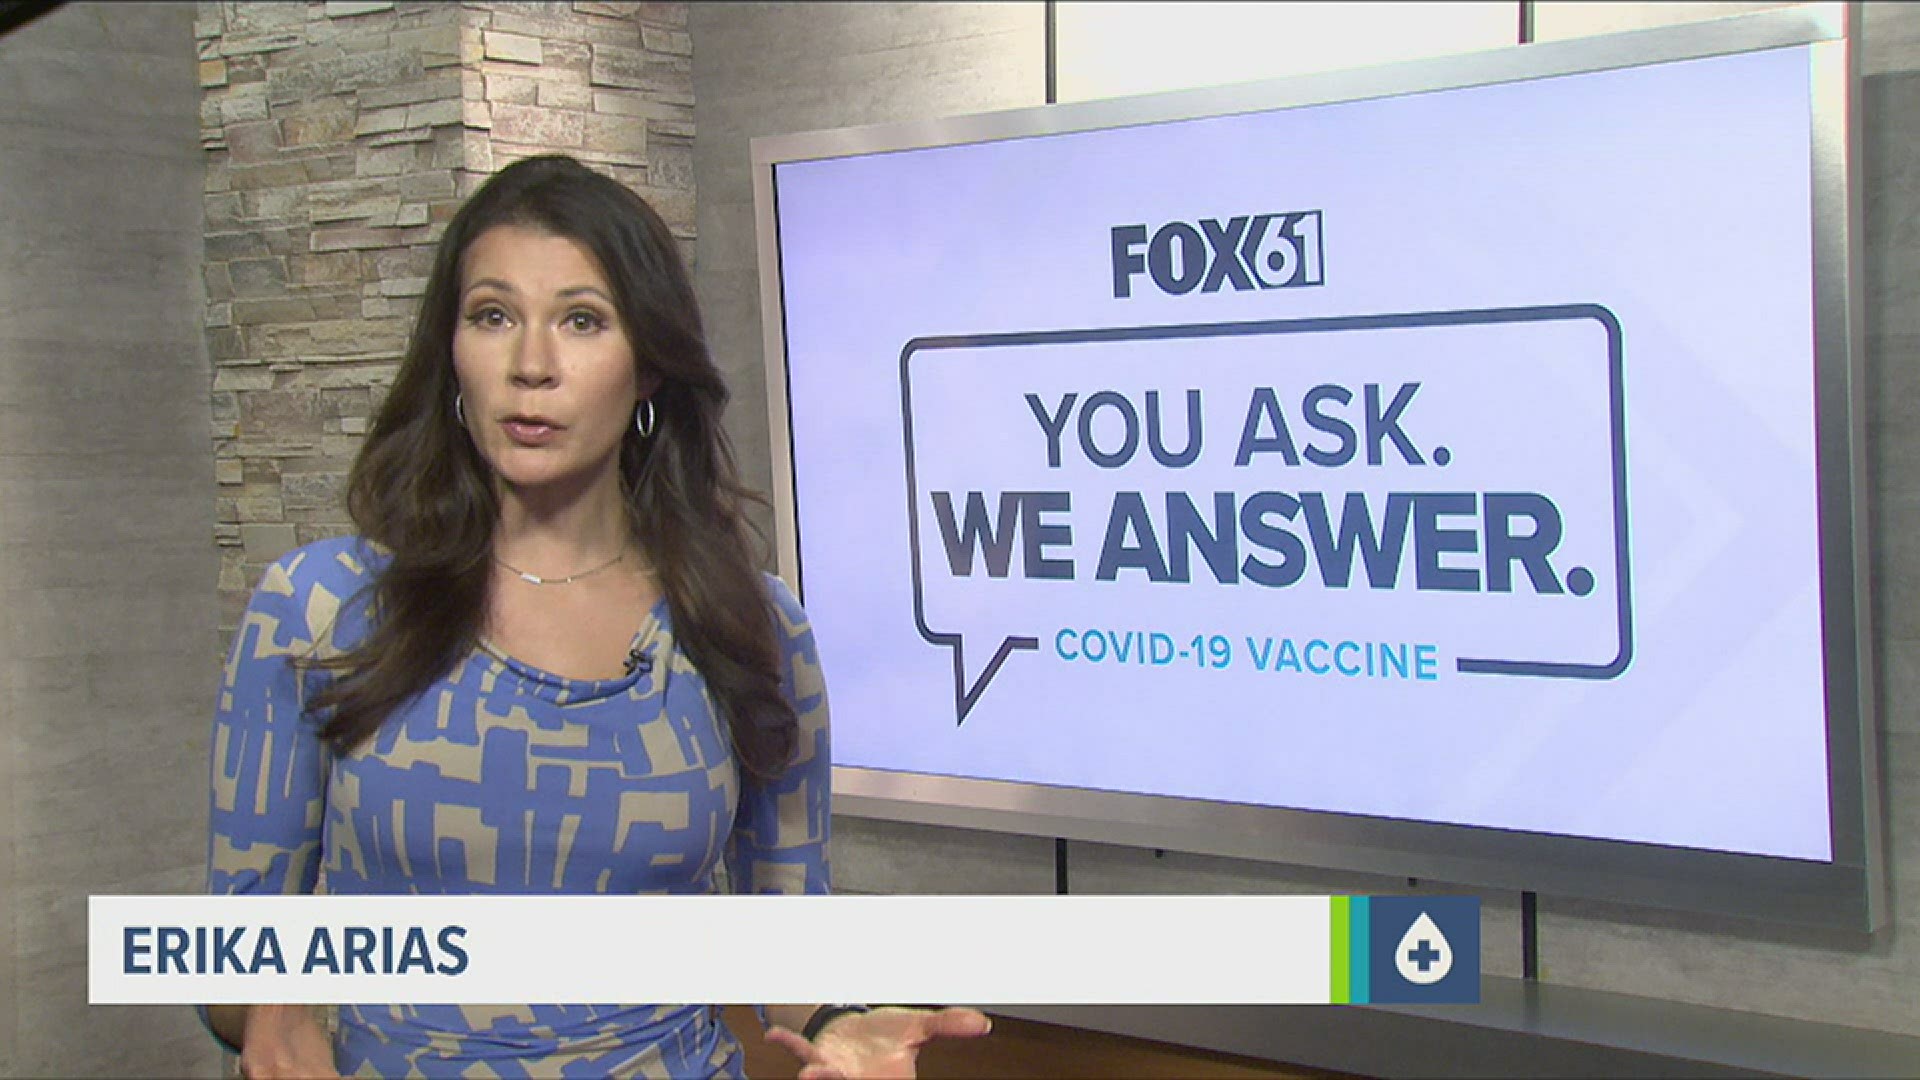 "If you contract COVID-19, do you have to wait to a certain amount of time to get the vaccine?"